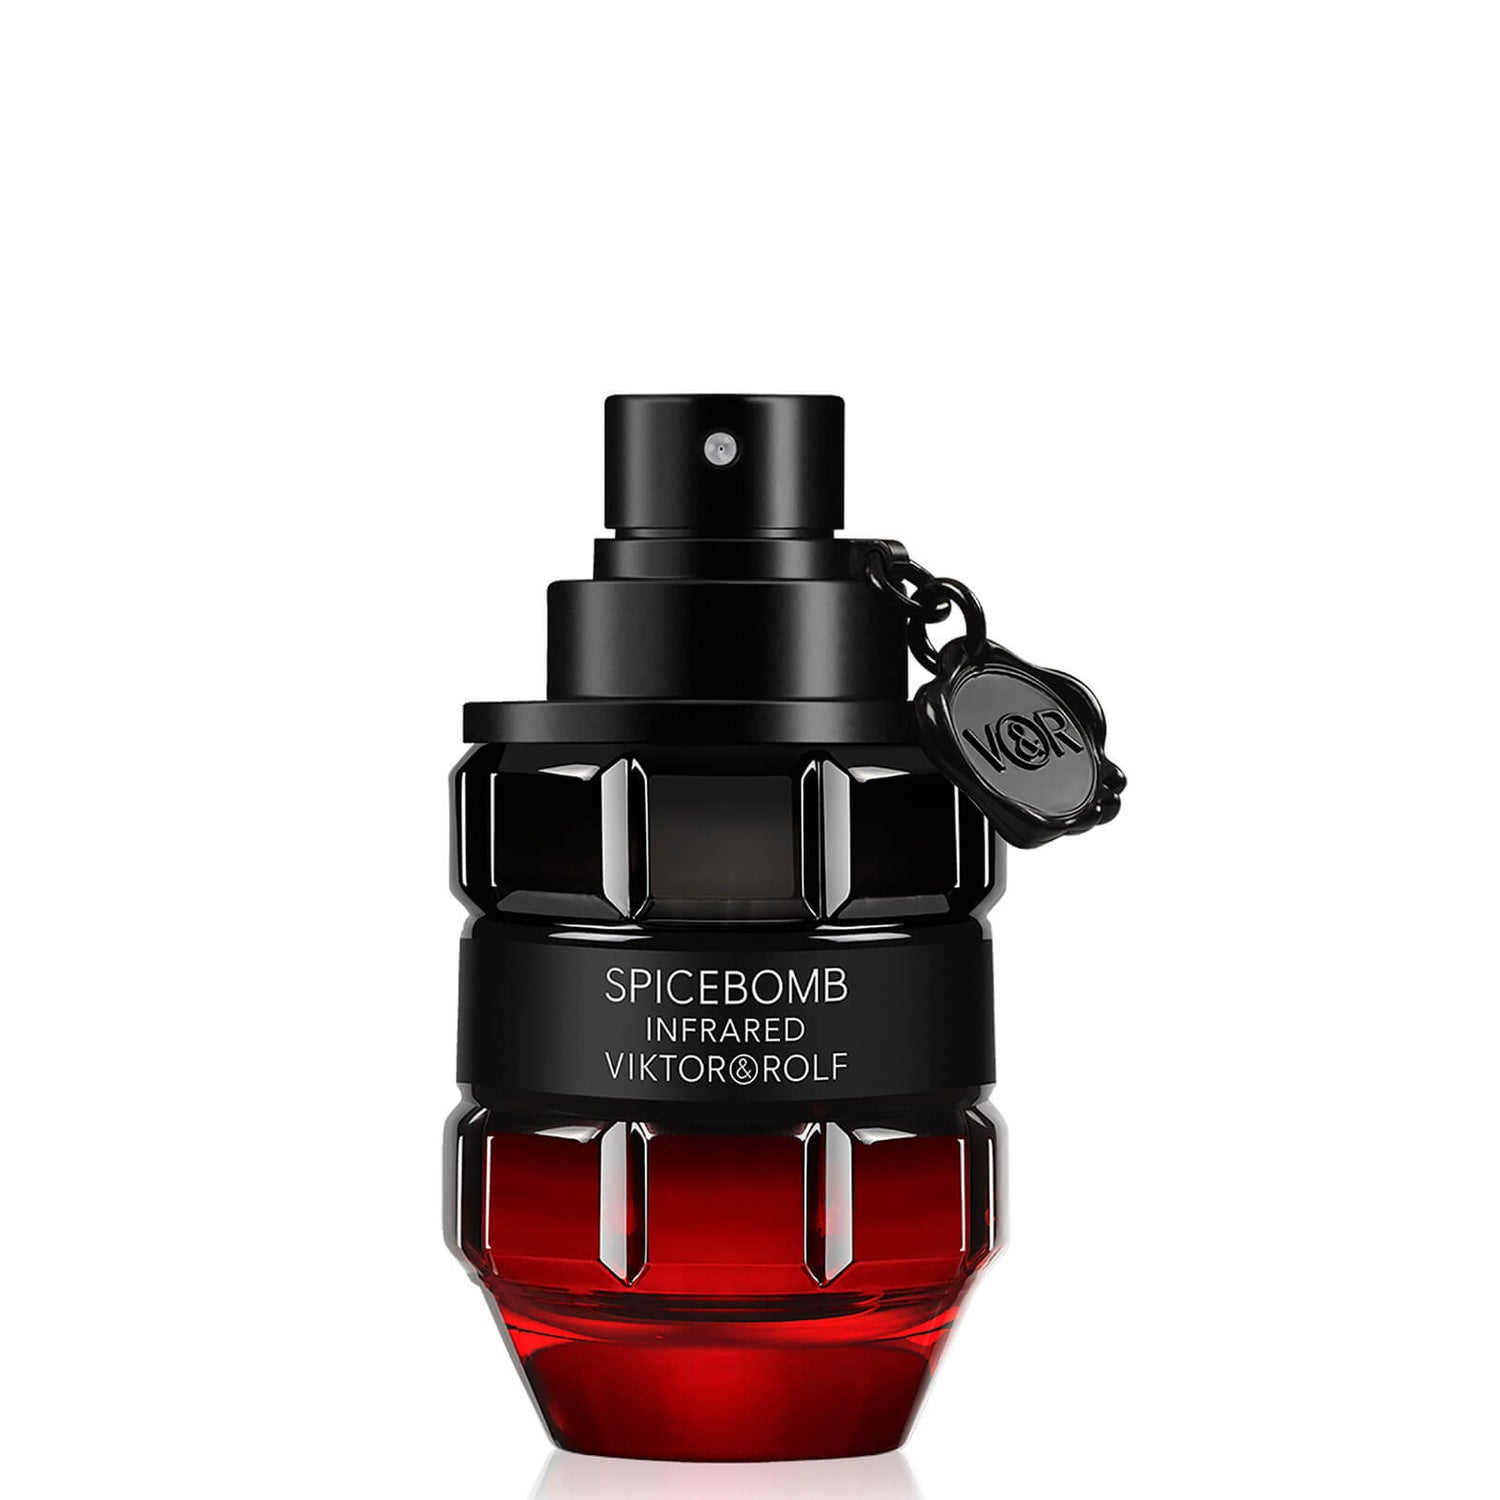 Viktor & Rolf Spicebomb Infrared (Différentes tailles)